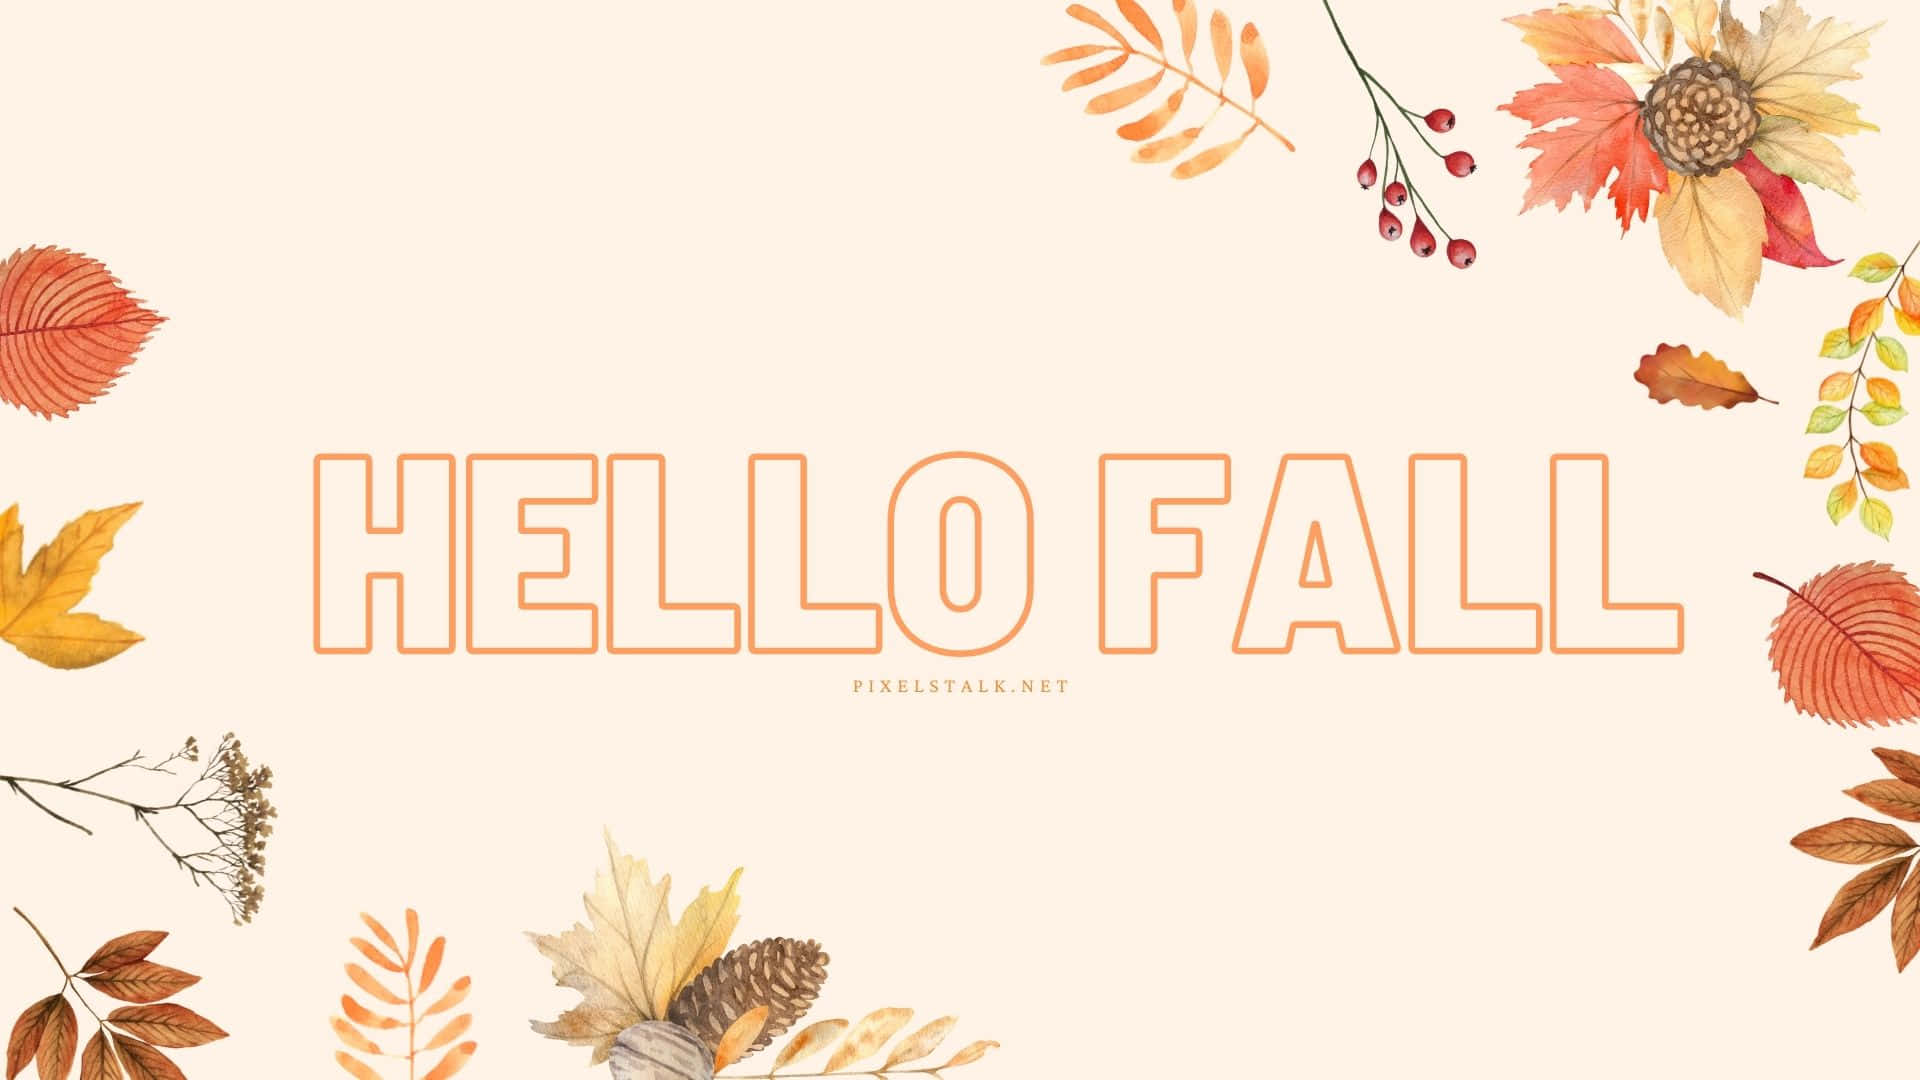 100+] Hello Fall Wallpapers